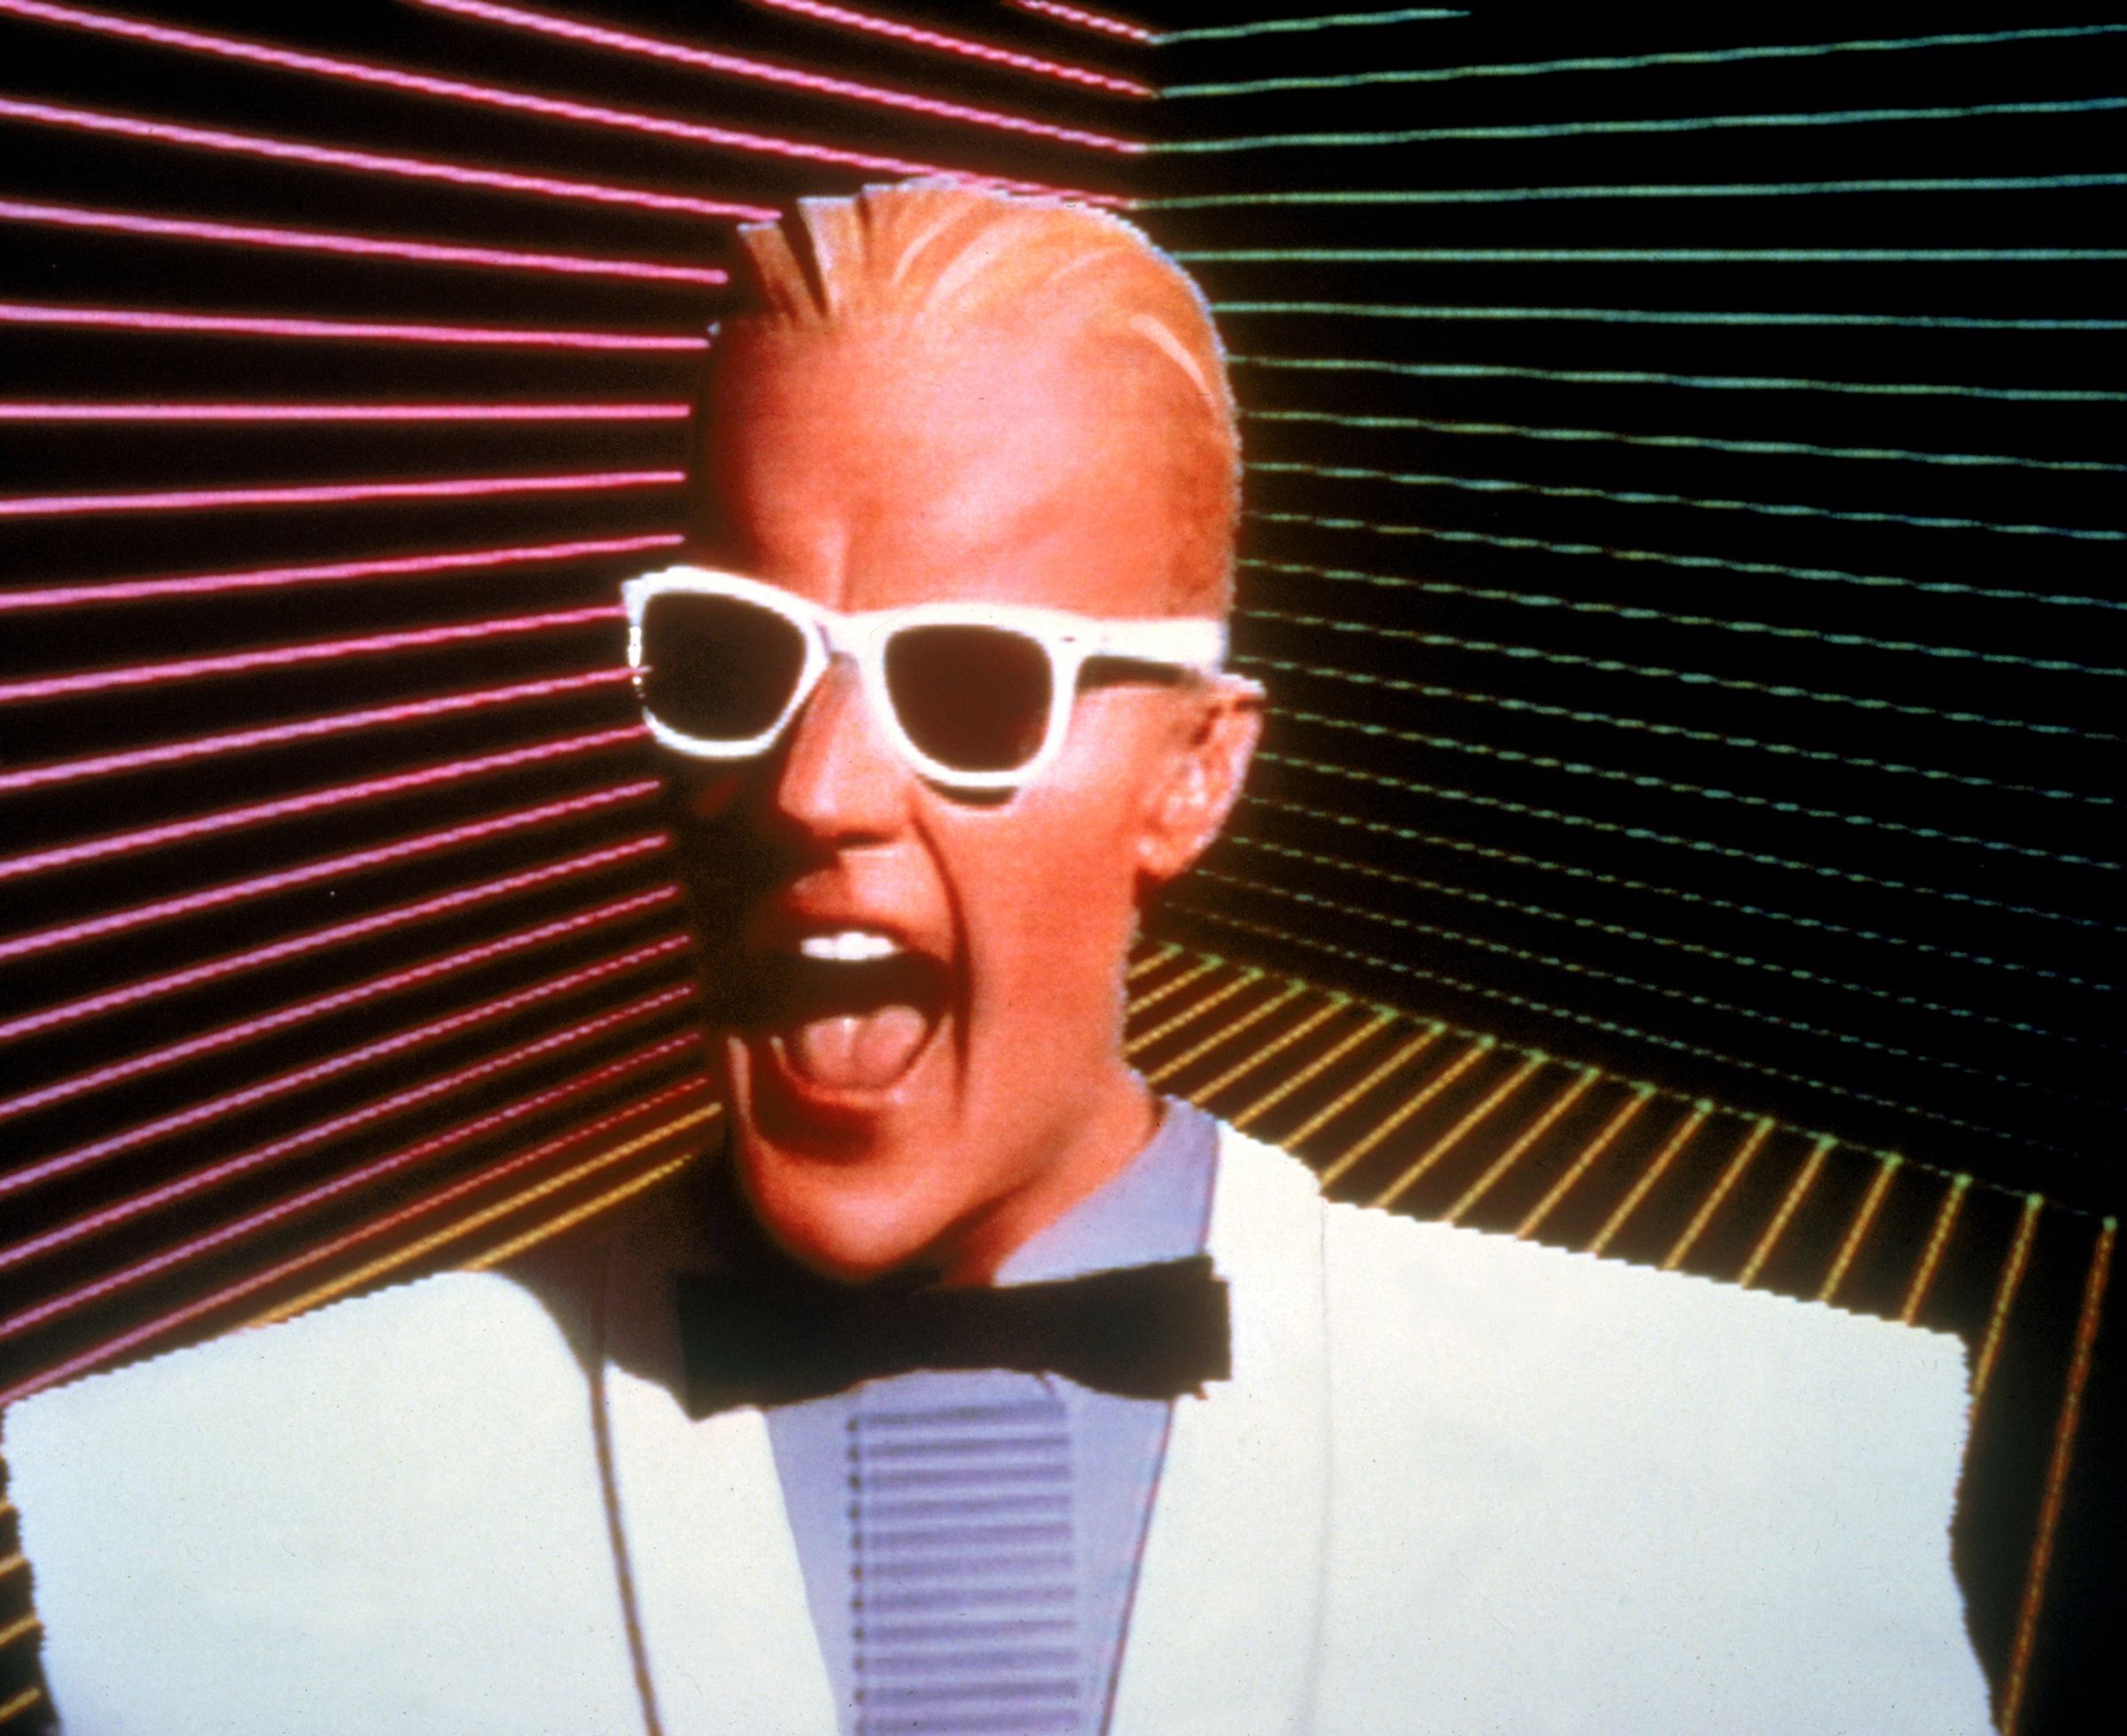 Max Headroom ABC show promotional images